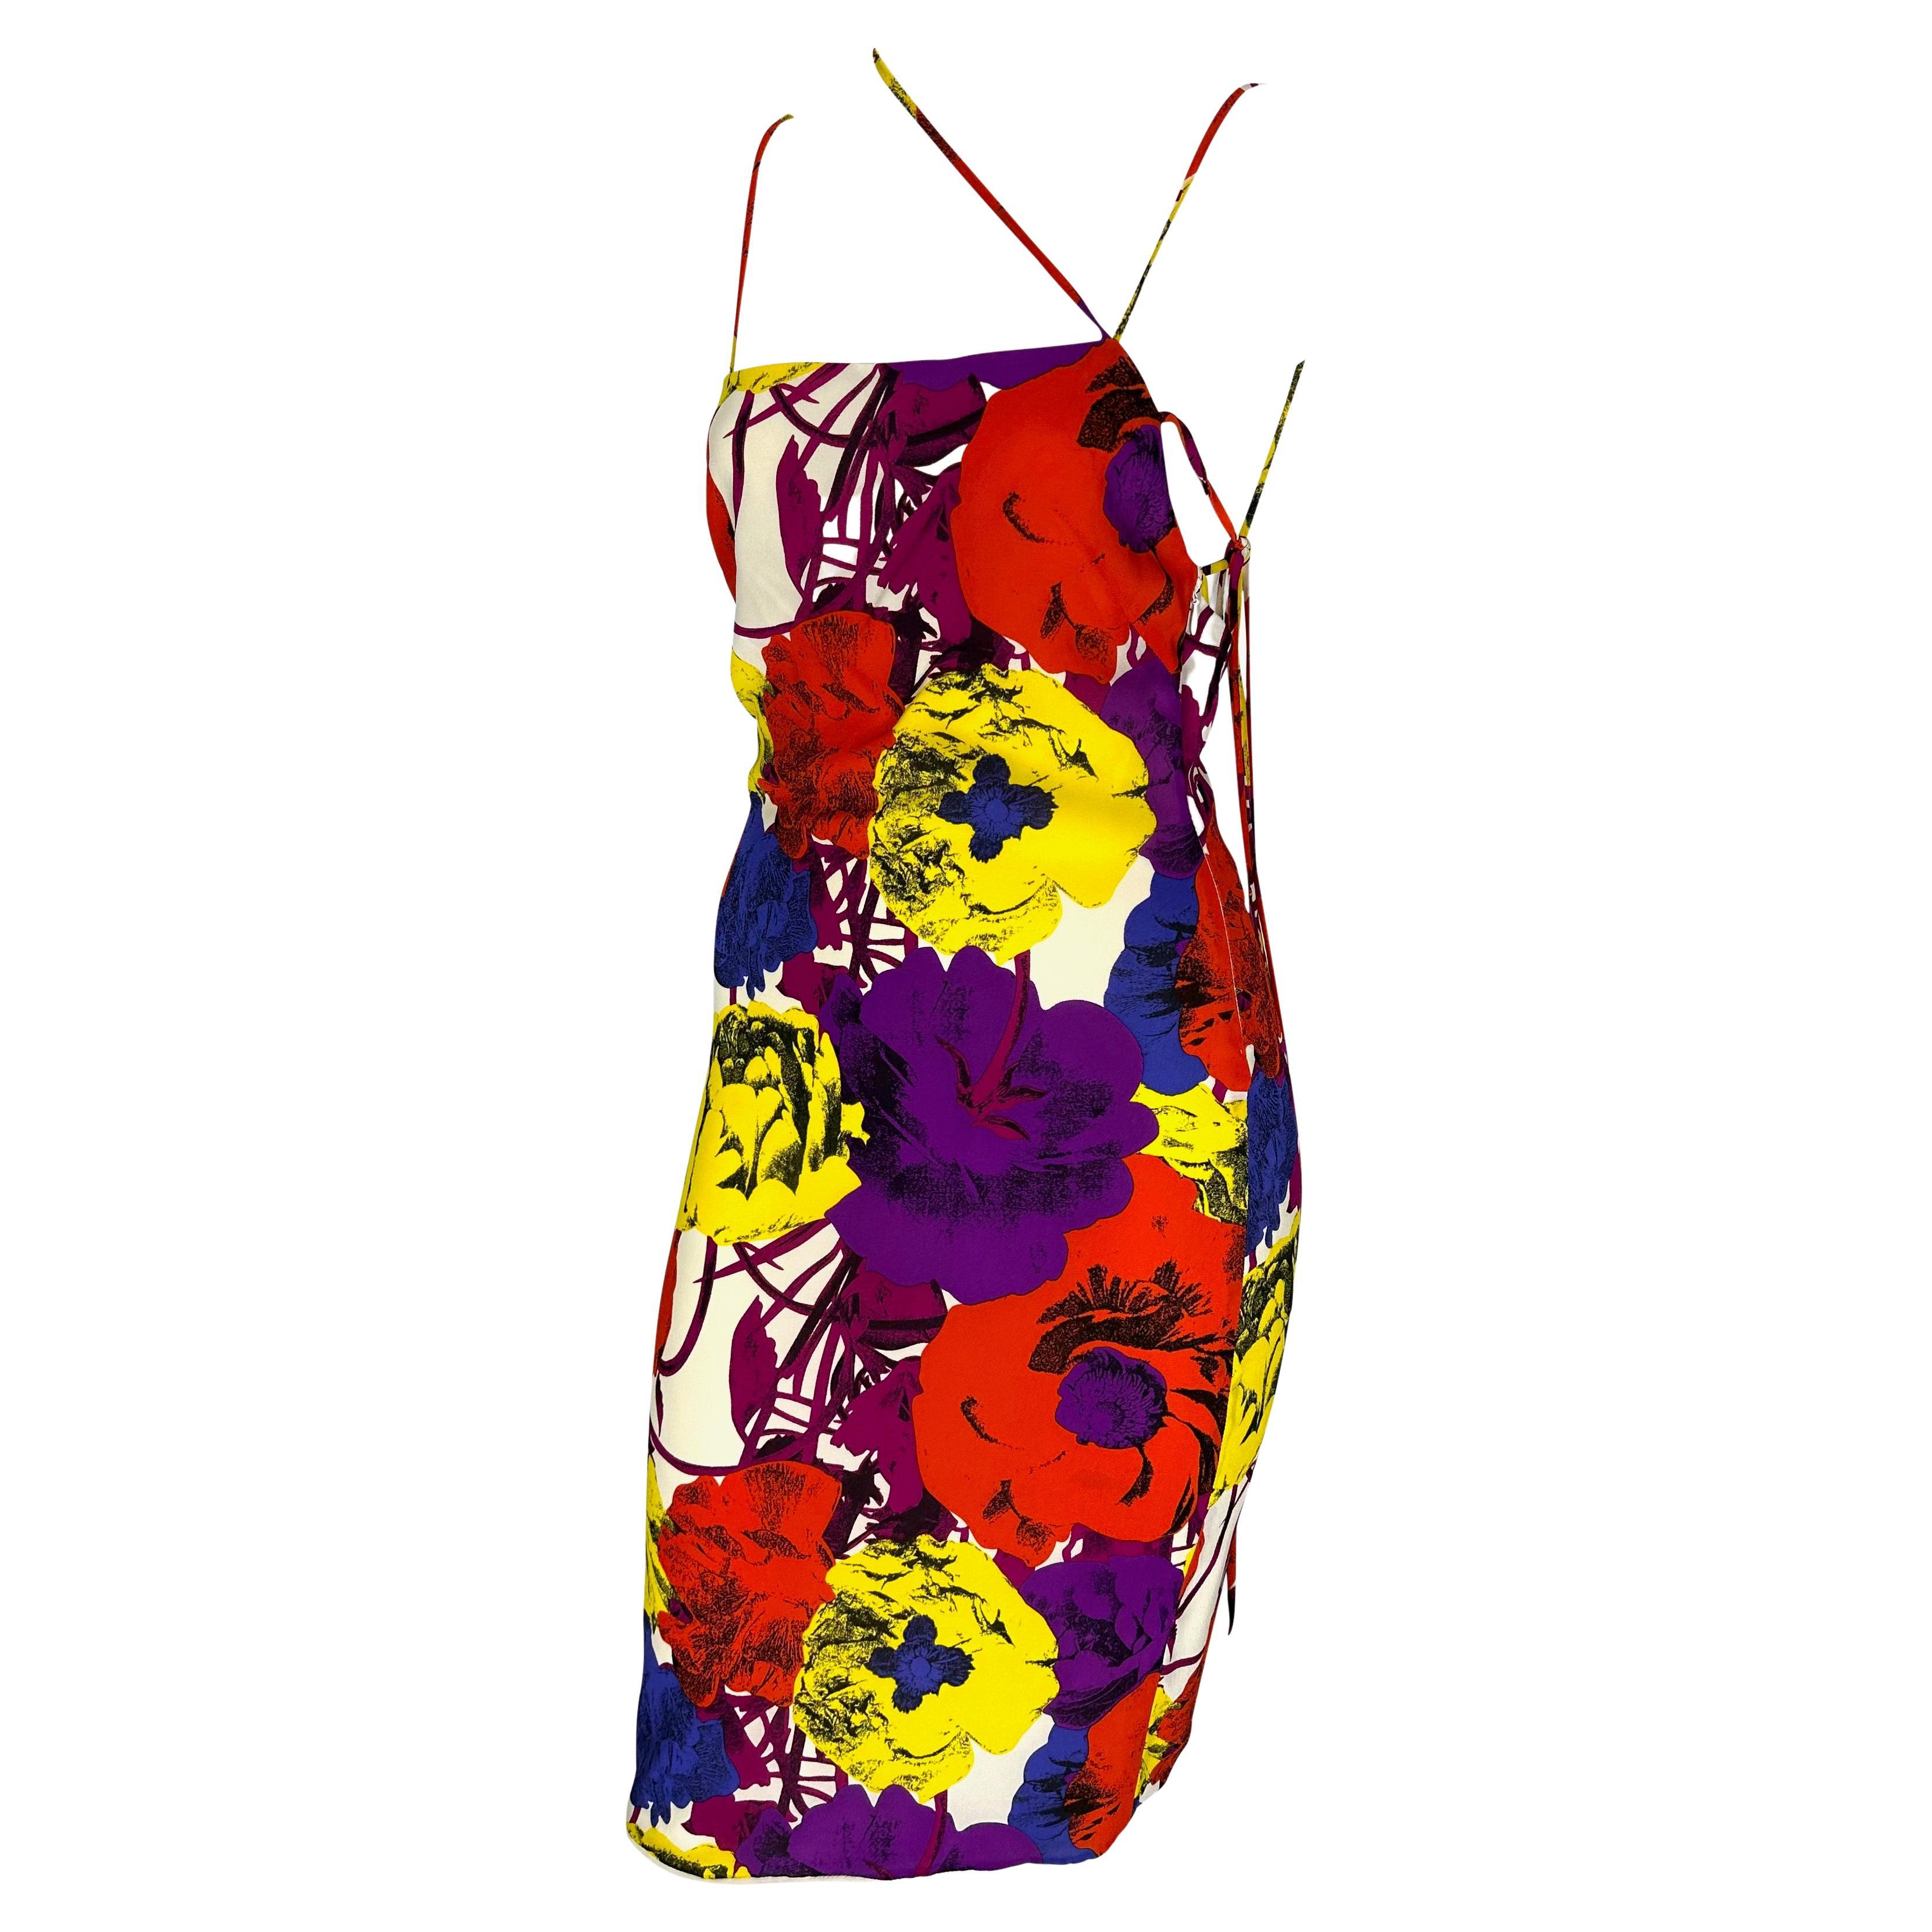 S/S 2002 Gianni Versace by Donatella Pop Art Floral Print Lace-Up Backless Dress In Excellent Condition For Sale In West Hollywood, CA